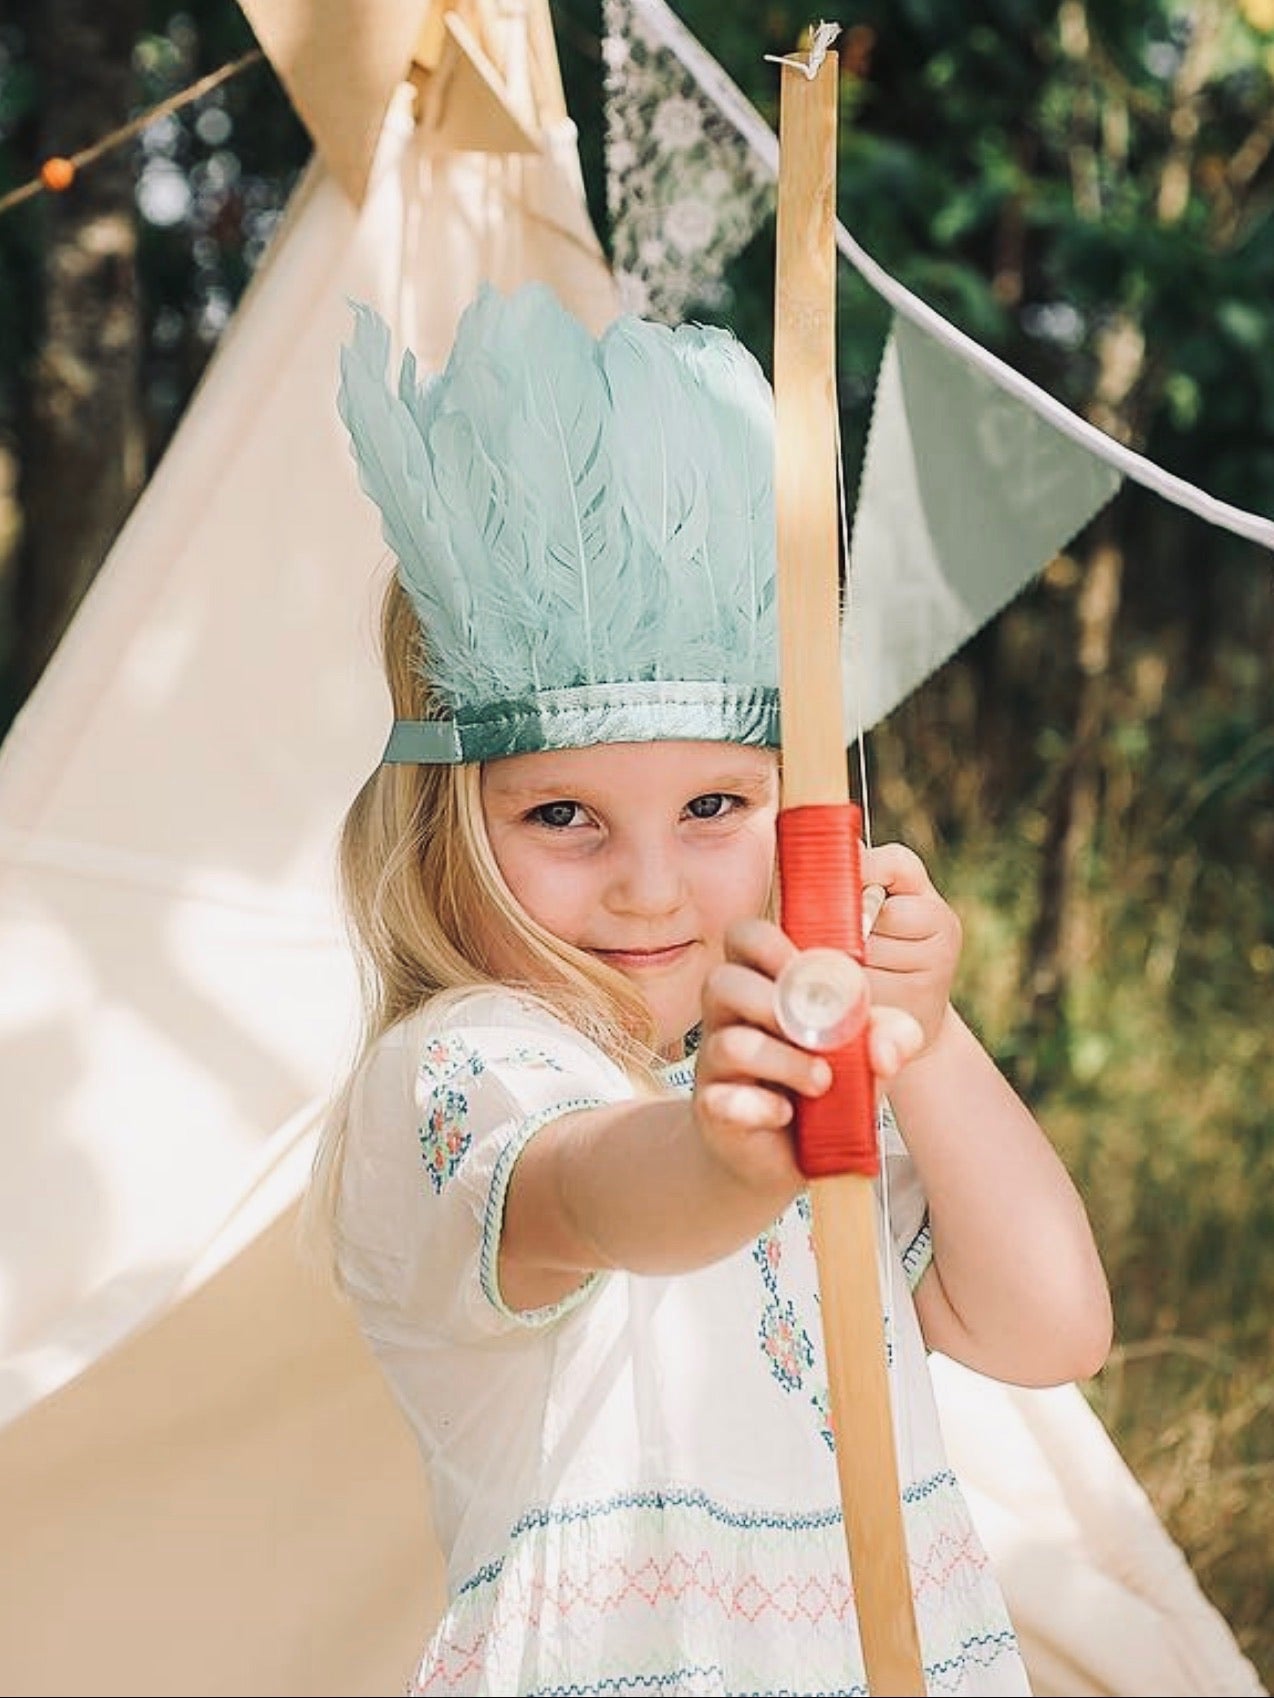 Girl shooting a bow and arrow, wearing a mint green feather and metallic leather headdress by For Just ONE Day